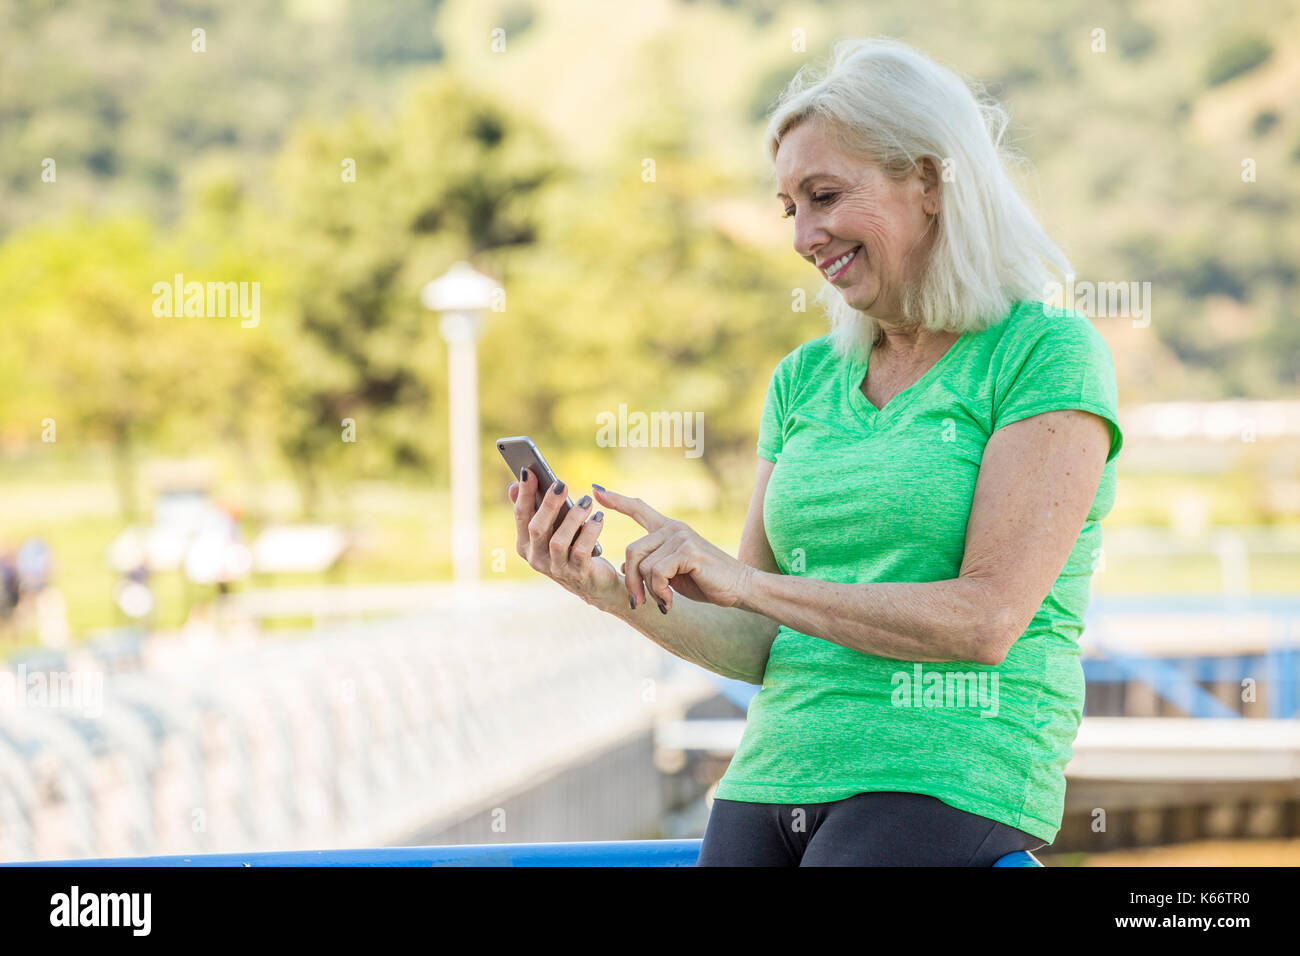 Older Caucasian woman texting on cell phone outdoors Stock Photo